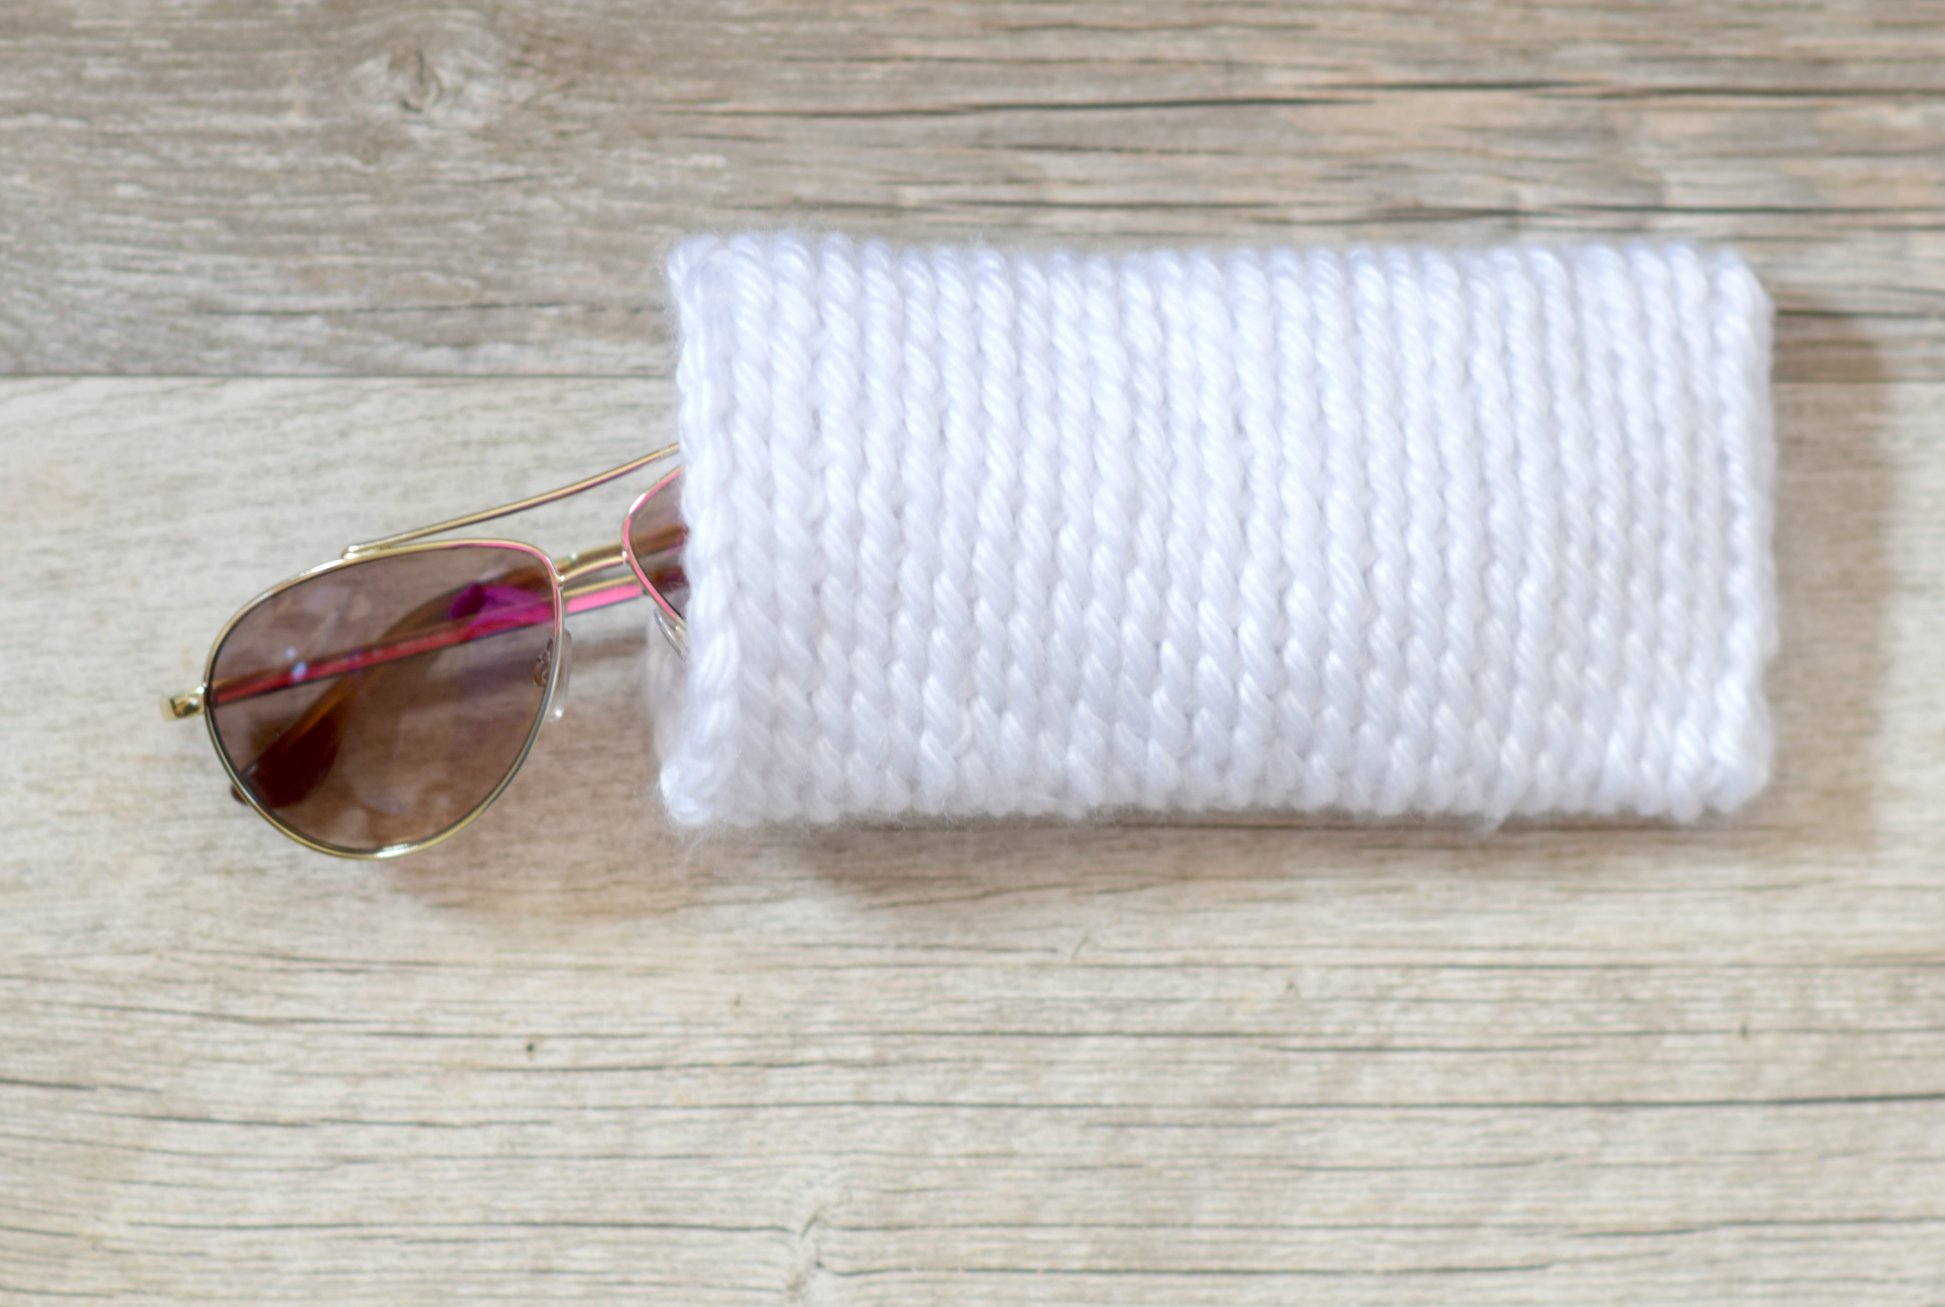 Would You Wear a Pair of Crocheted Eyeglasses?